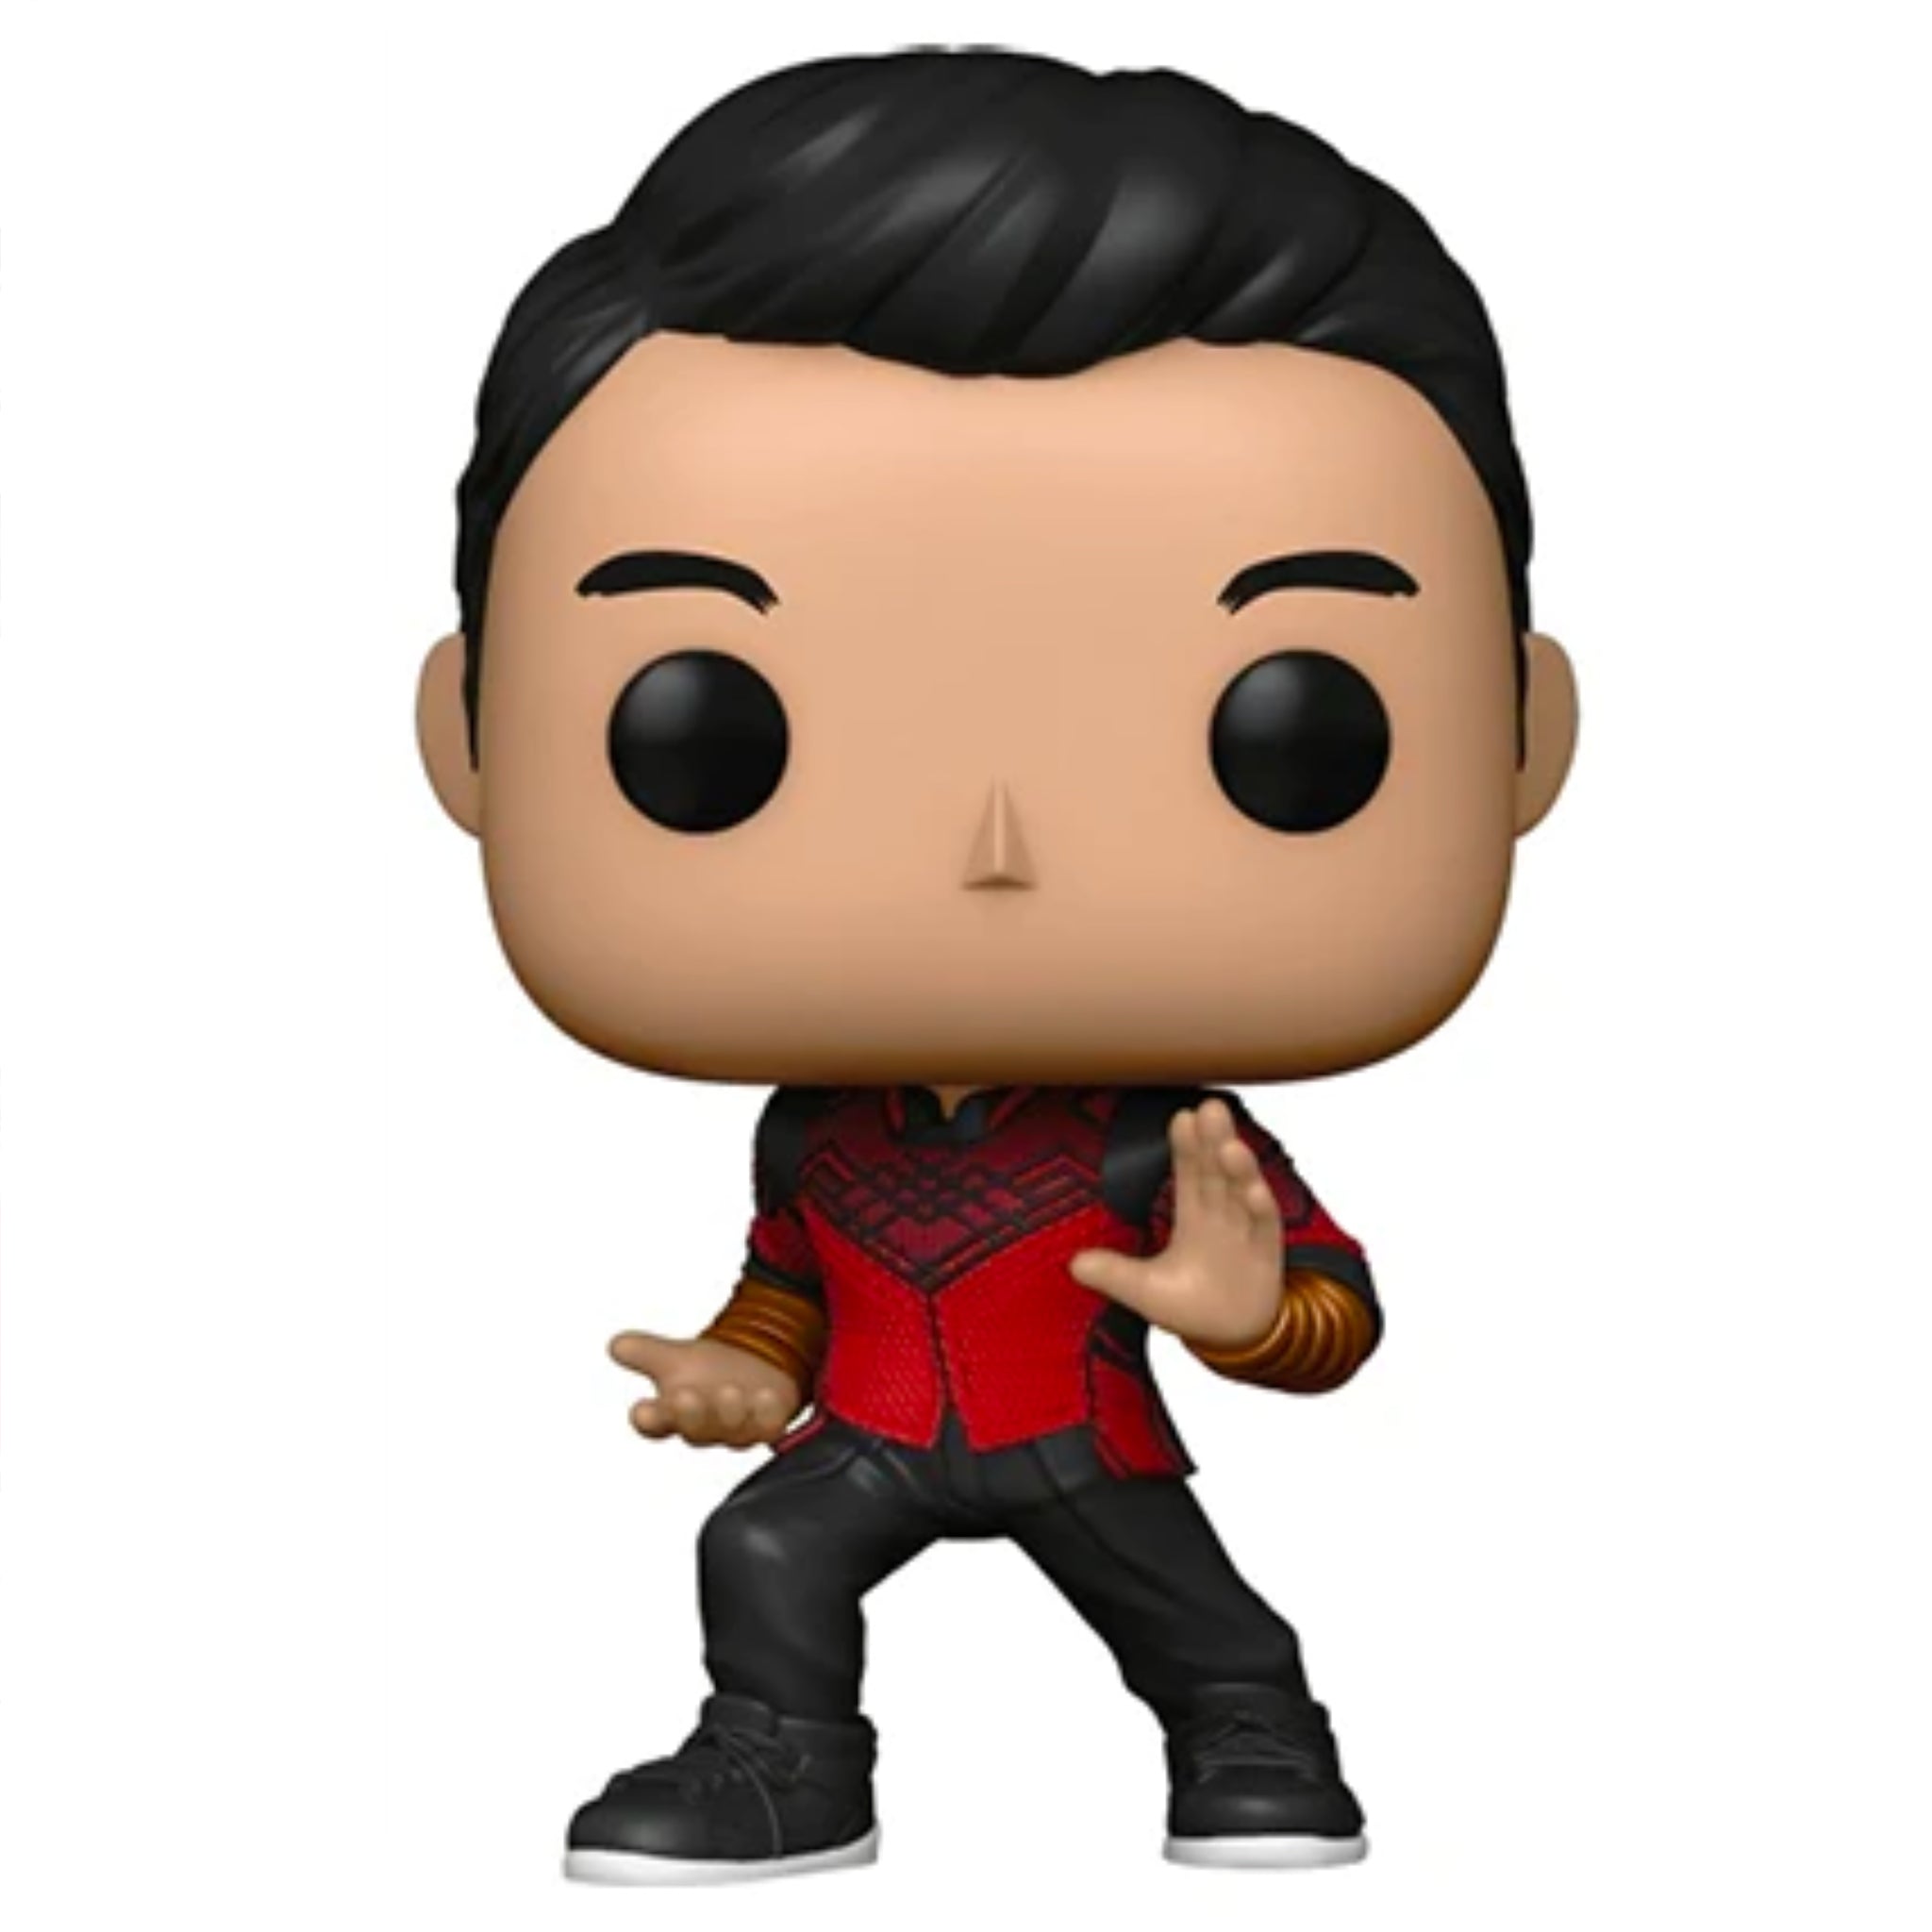 Shang-Chi Funko Pop! MARVEL EXCLUSIVE